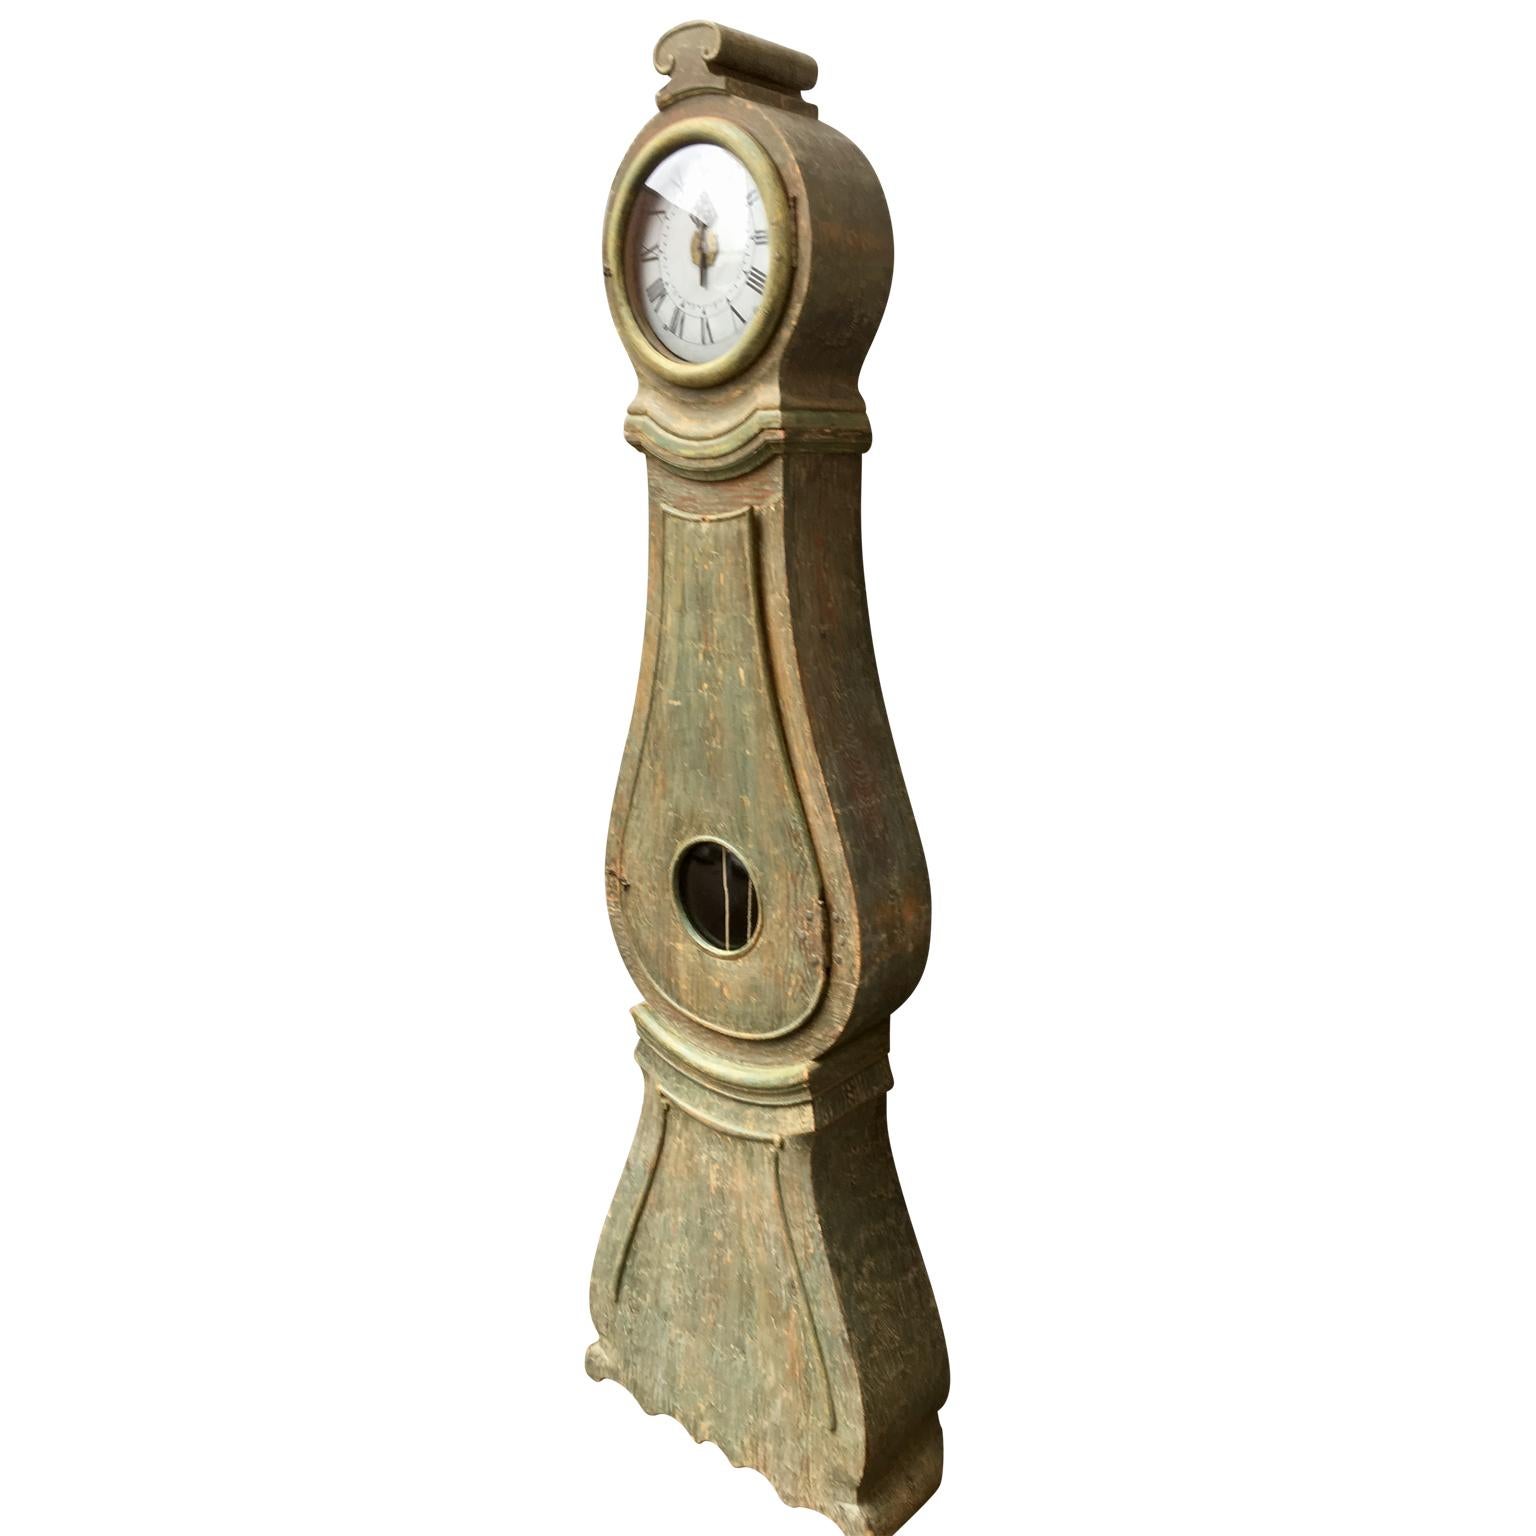 A Swedish Gustavian Grandfather clock in its original paint. The clock has being carefully scraped to his original color. It is all hand carved from the country Gustavian period of the turning of the century 1800. The face of the clockwork is of an